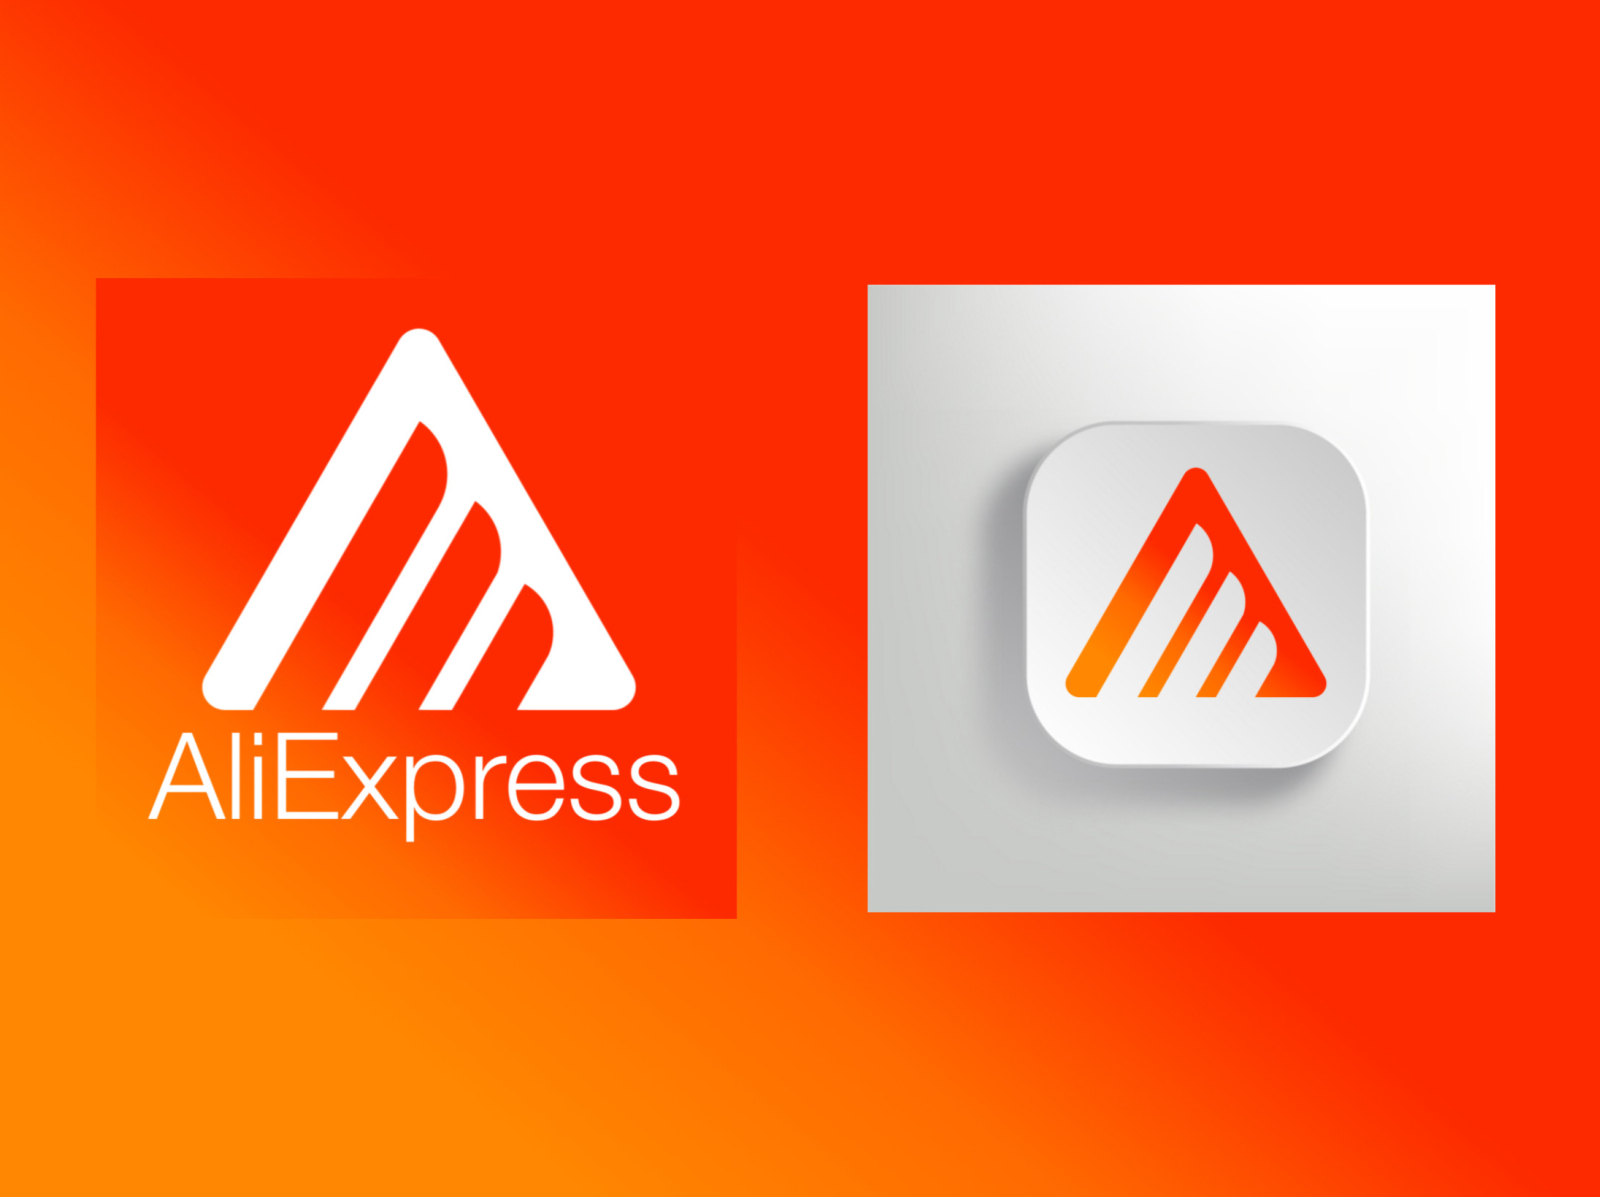 new logo for aliexpress by paolo falqui blØpa on dribbble